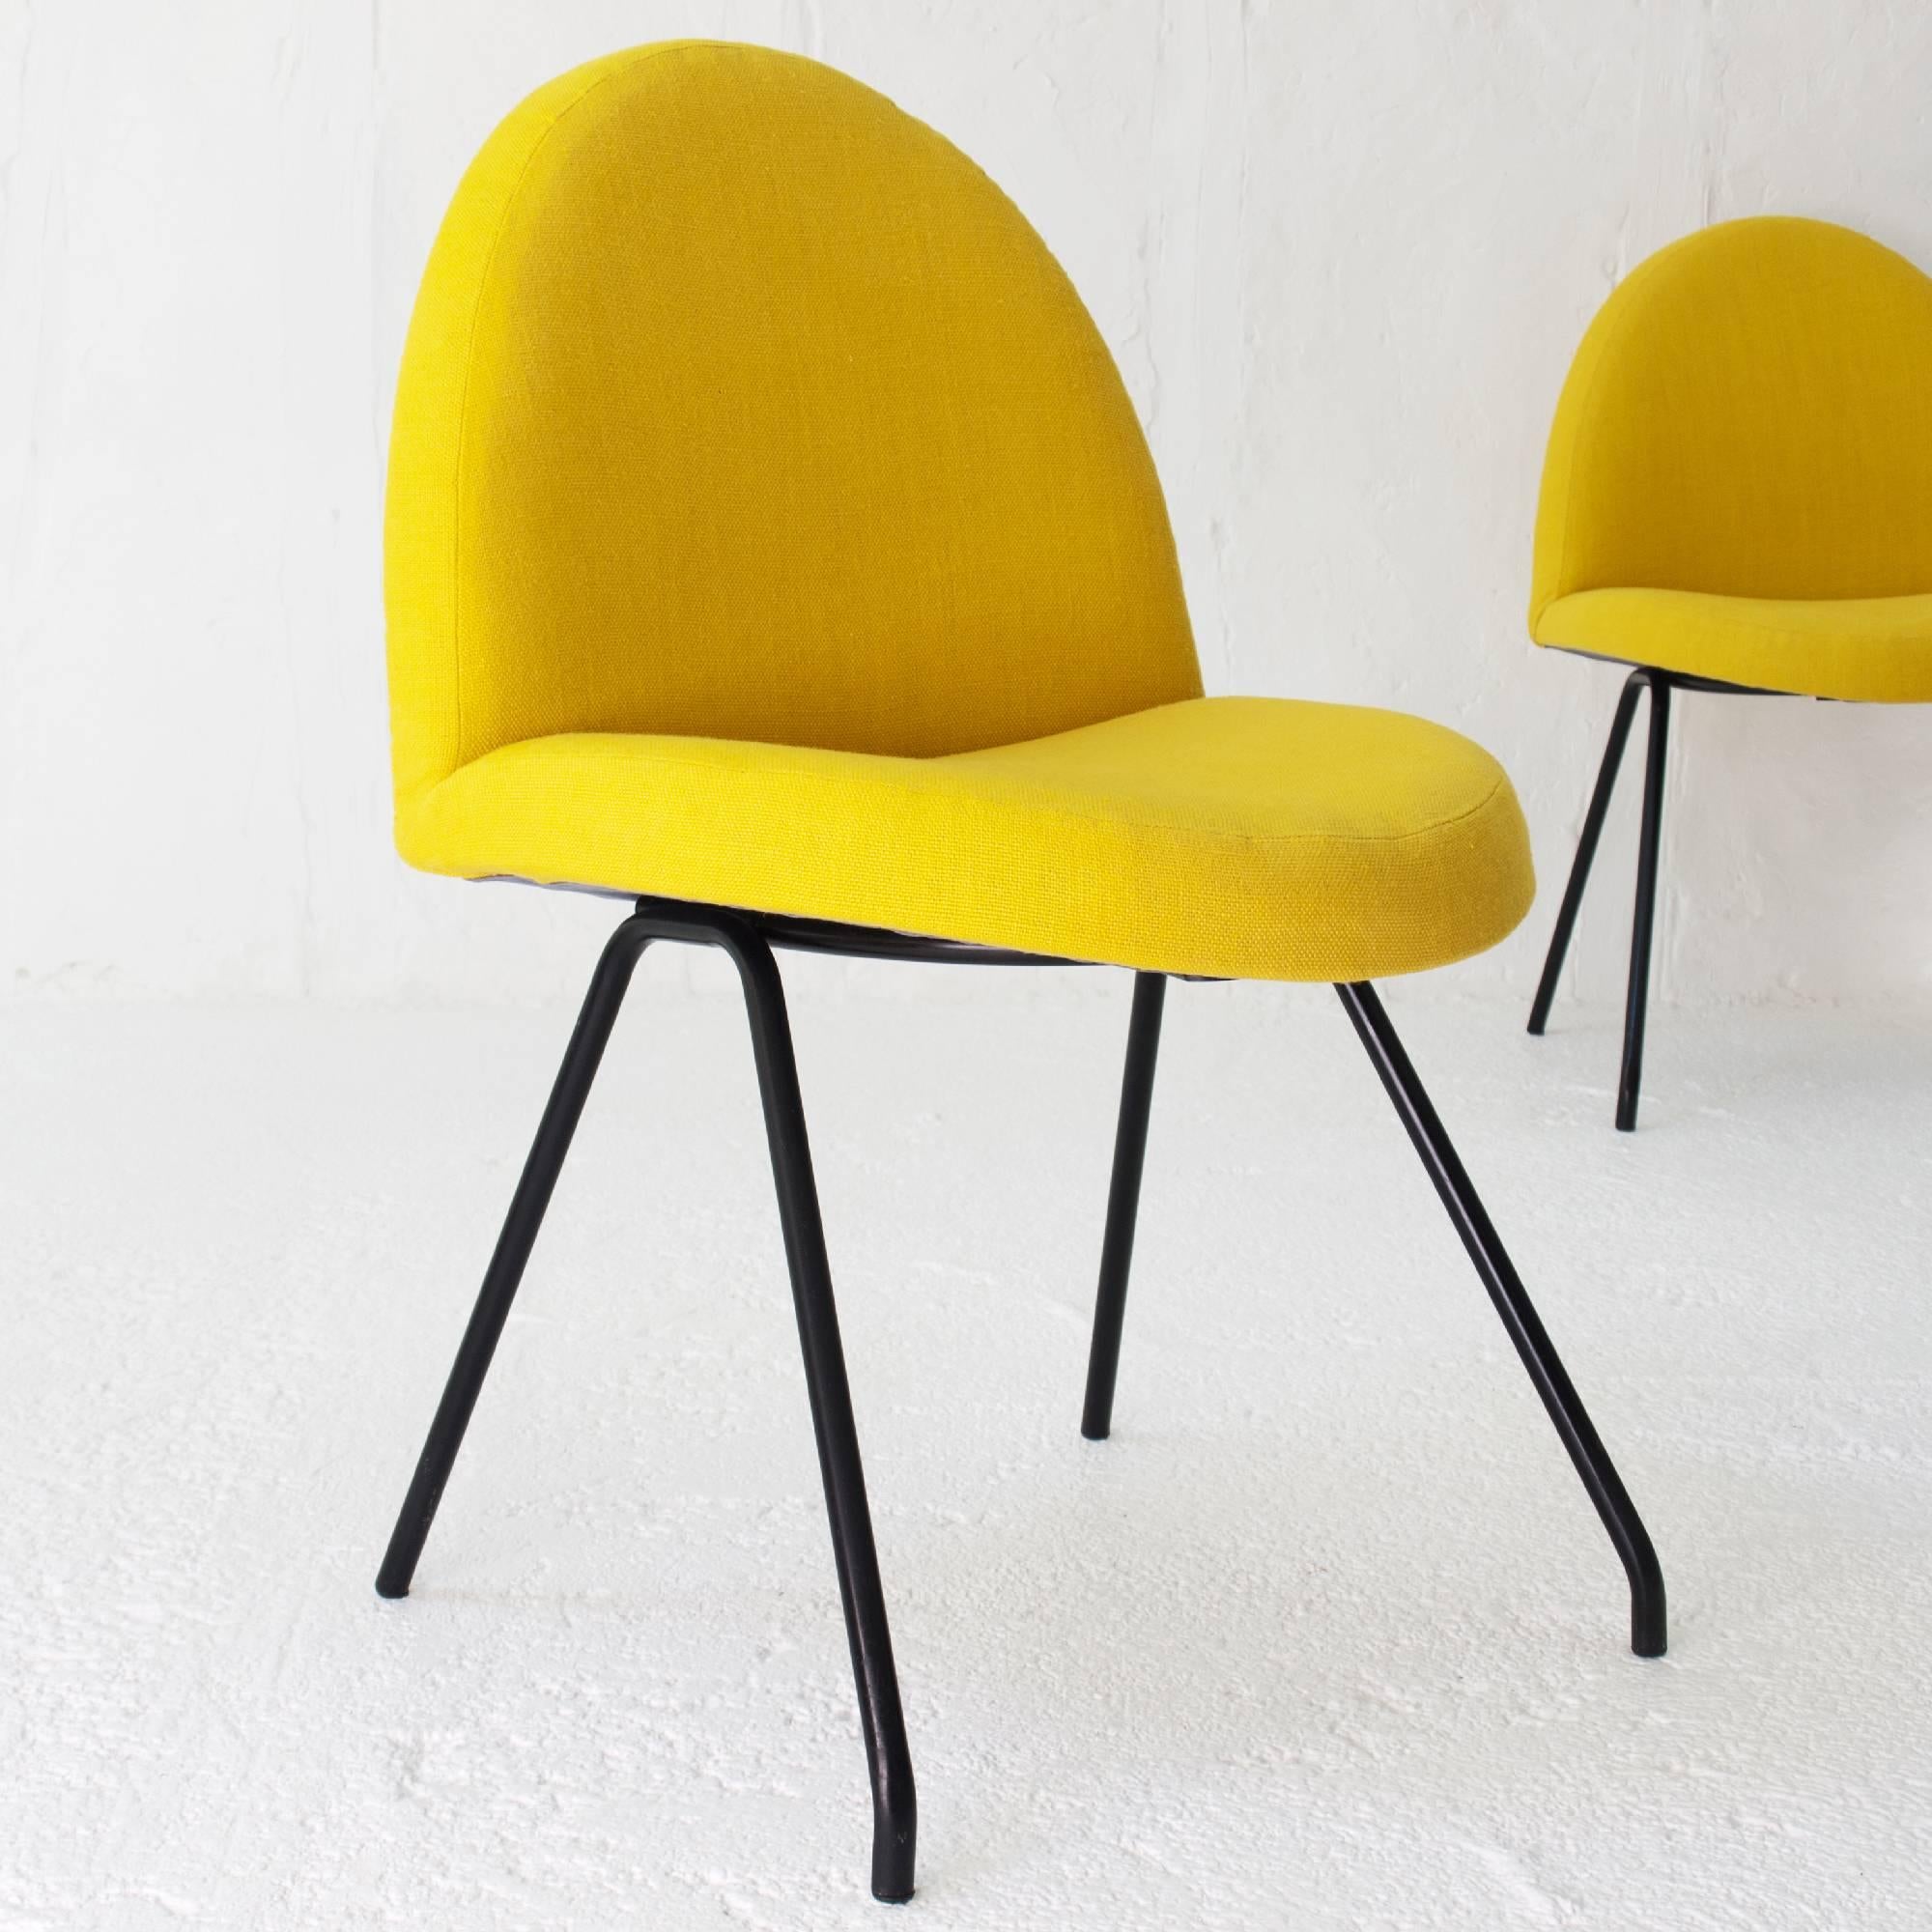 Joseph-André Motte Pair of Chairs 771 for Steiner 1